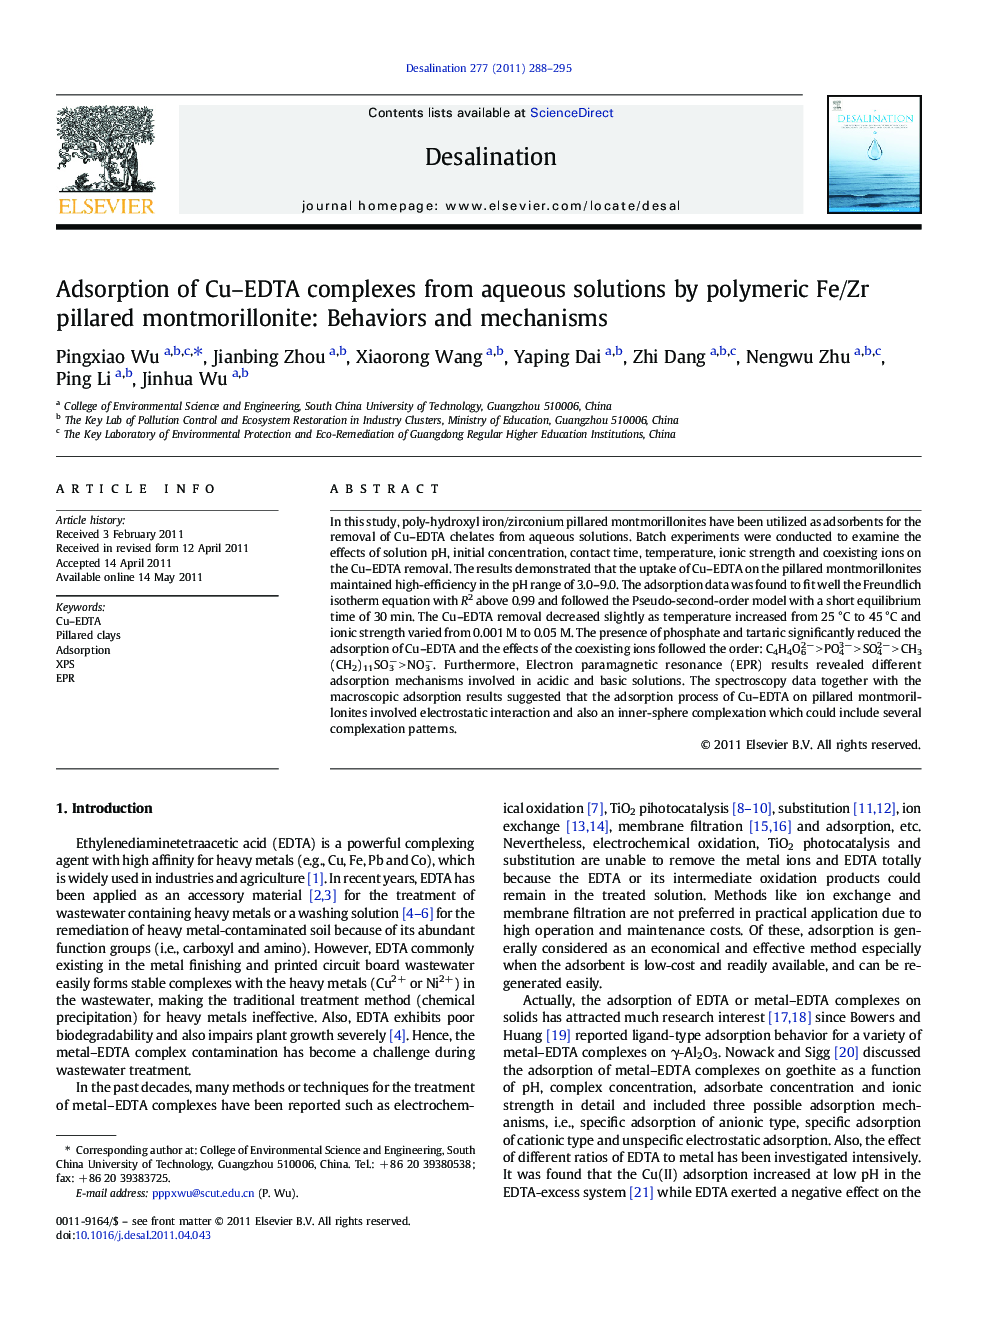 Adsorption of Cu-EDTA complexes from aqueous solutions by polymeric Fe/Zr pillared montmorillonite: Behaviors and mechanisms